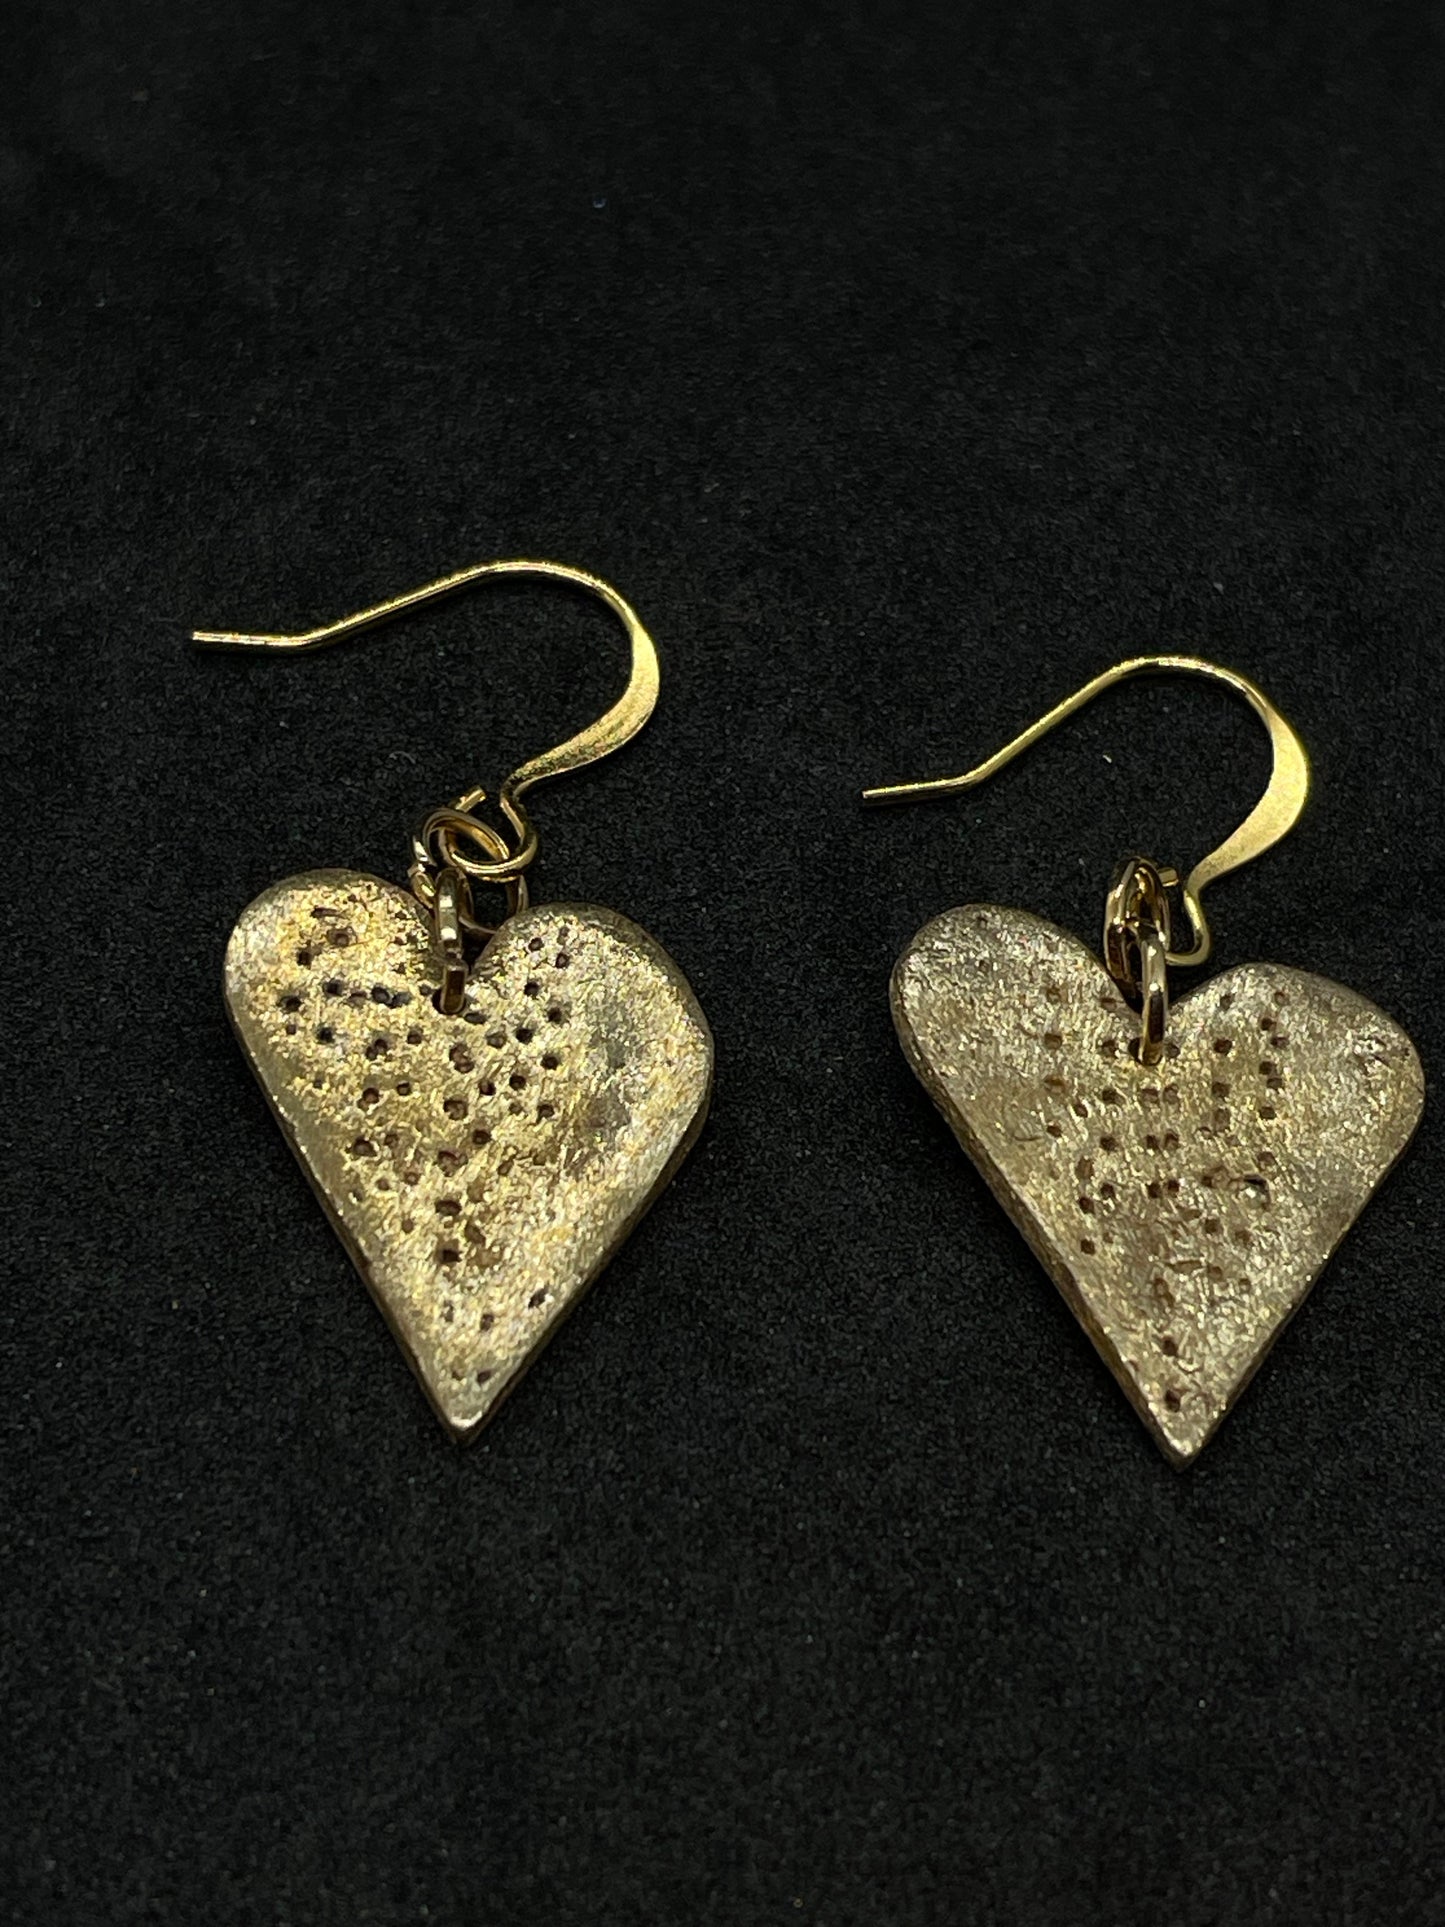 Bronze heart earrings with pin prick lines